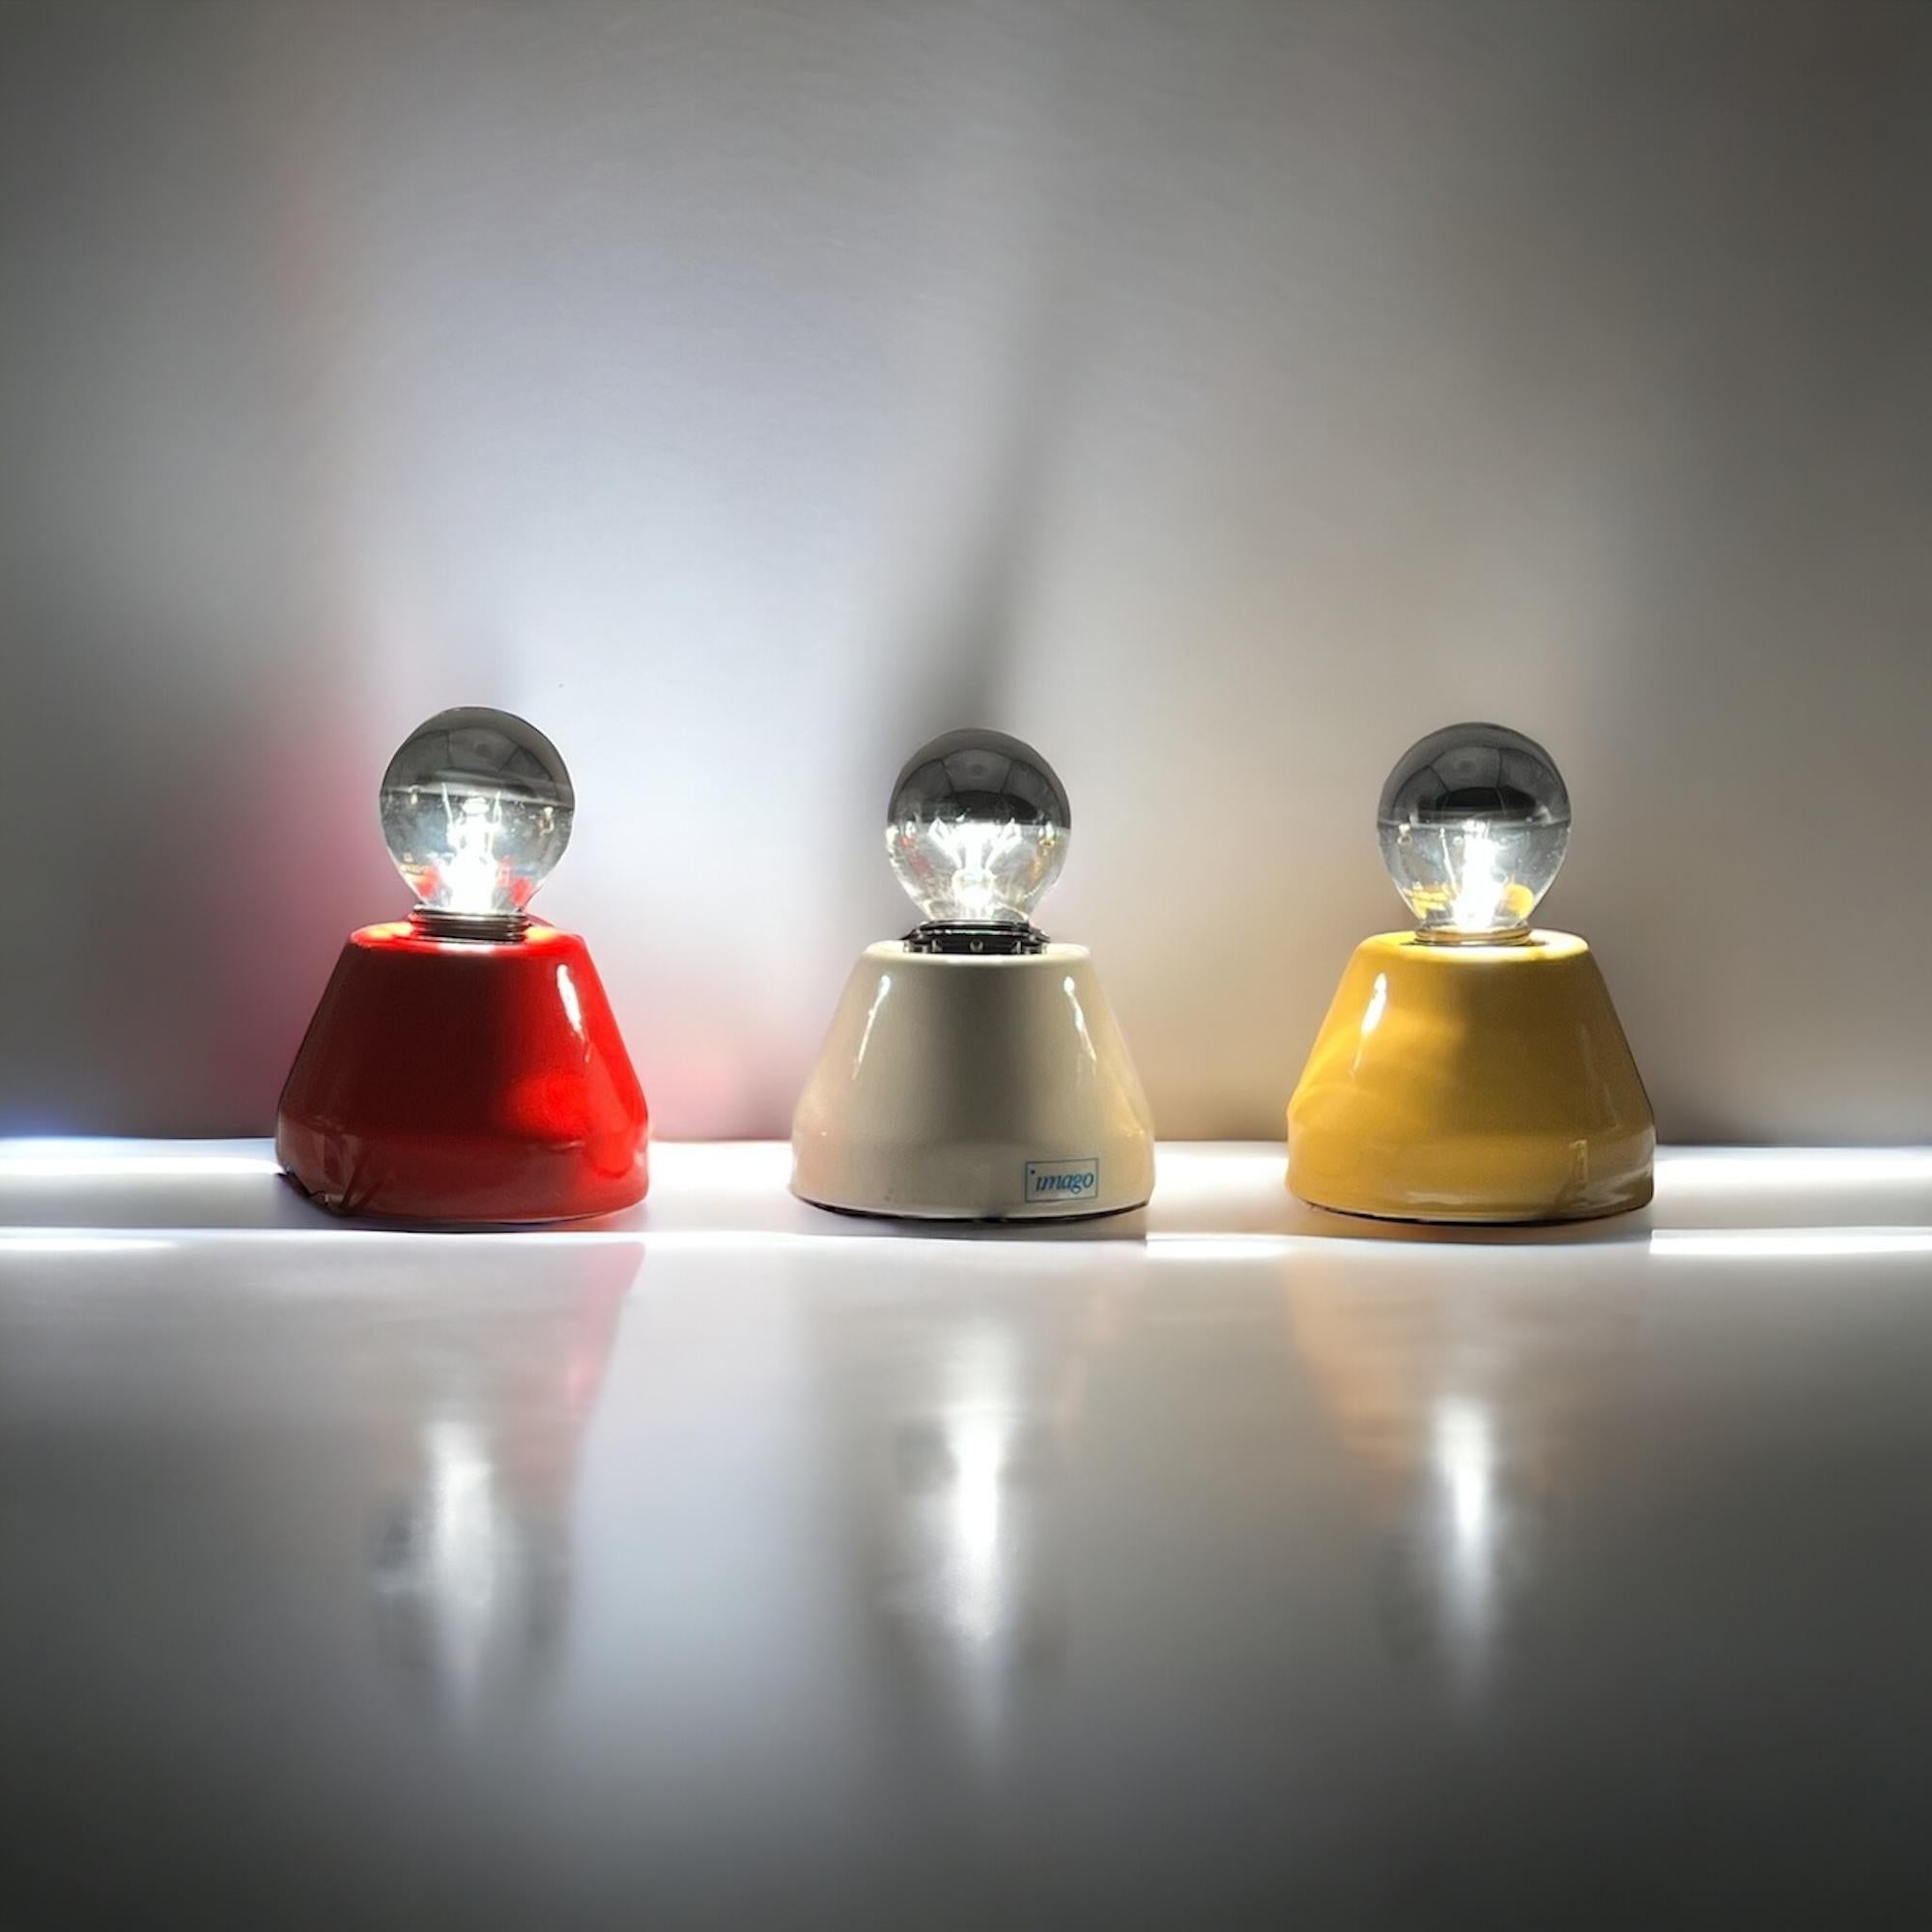 Vintage 80s Ceramic Lights Imago Italy - Vibrant Hues - Set of 3 New Old Stock For Sale 3